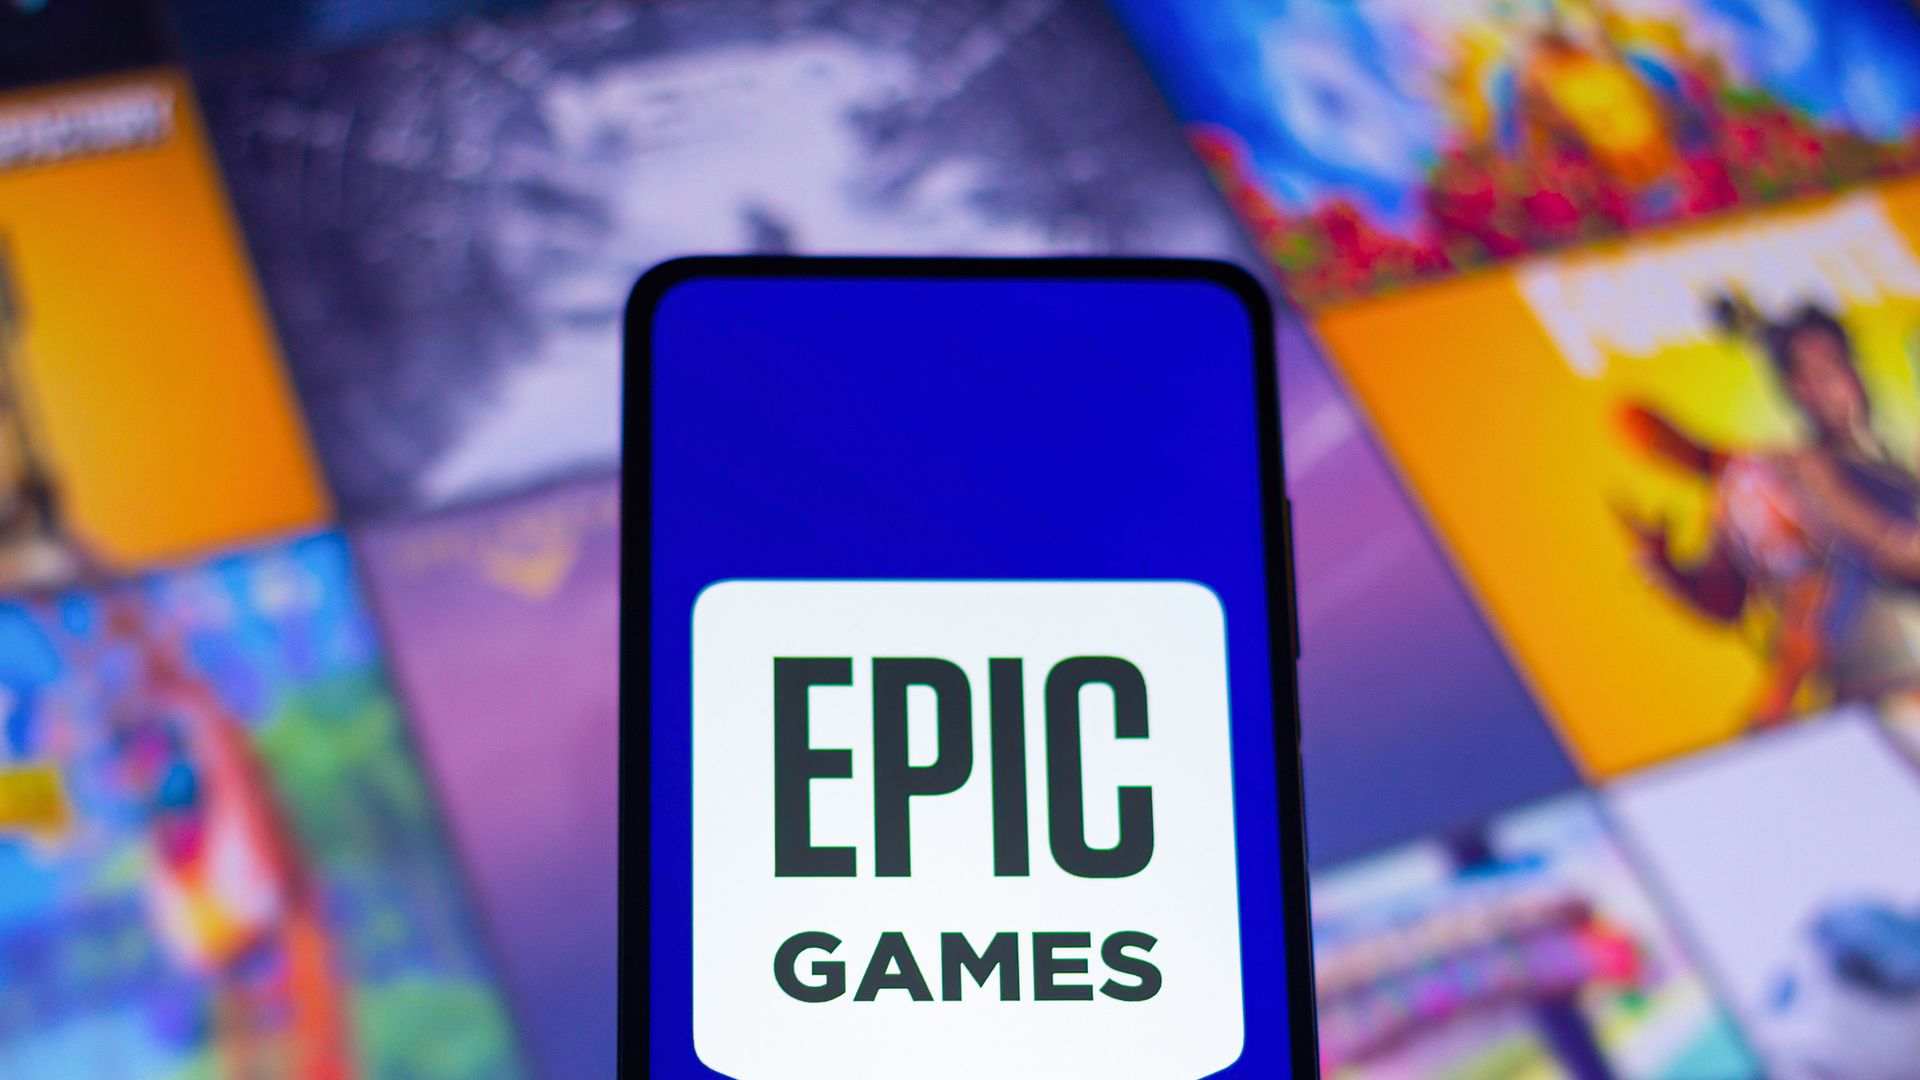 Photo illustration of a phone displaying the Epic Games logo in front an array of video game title screens